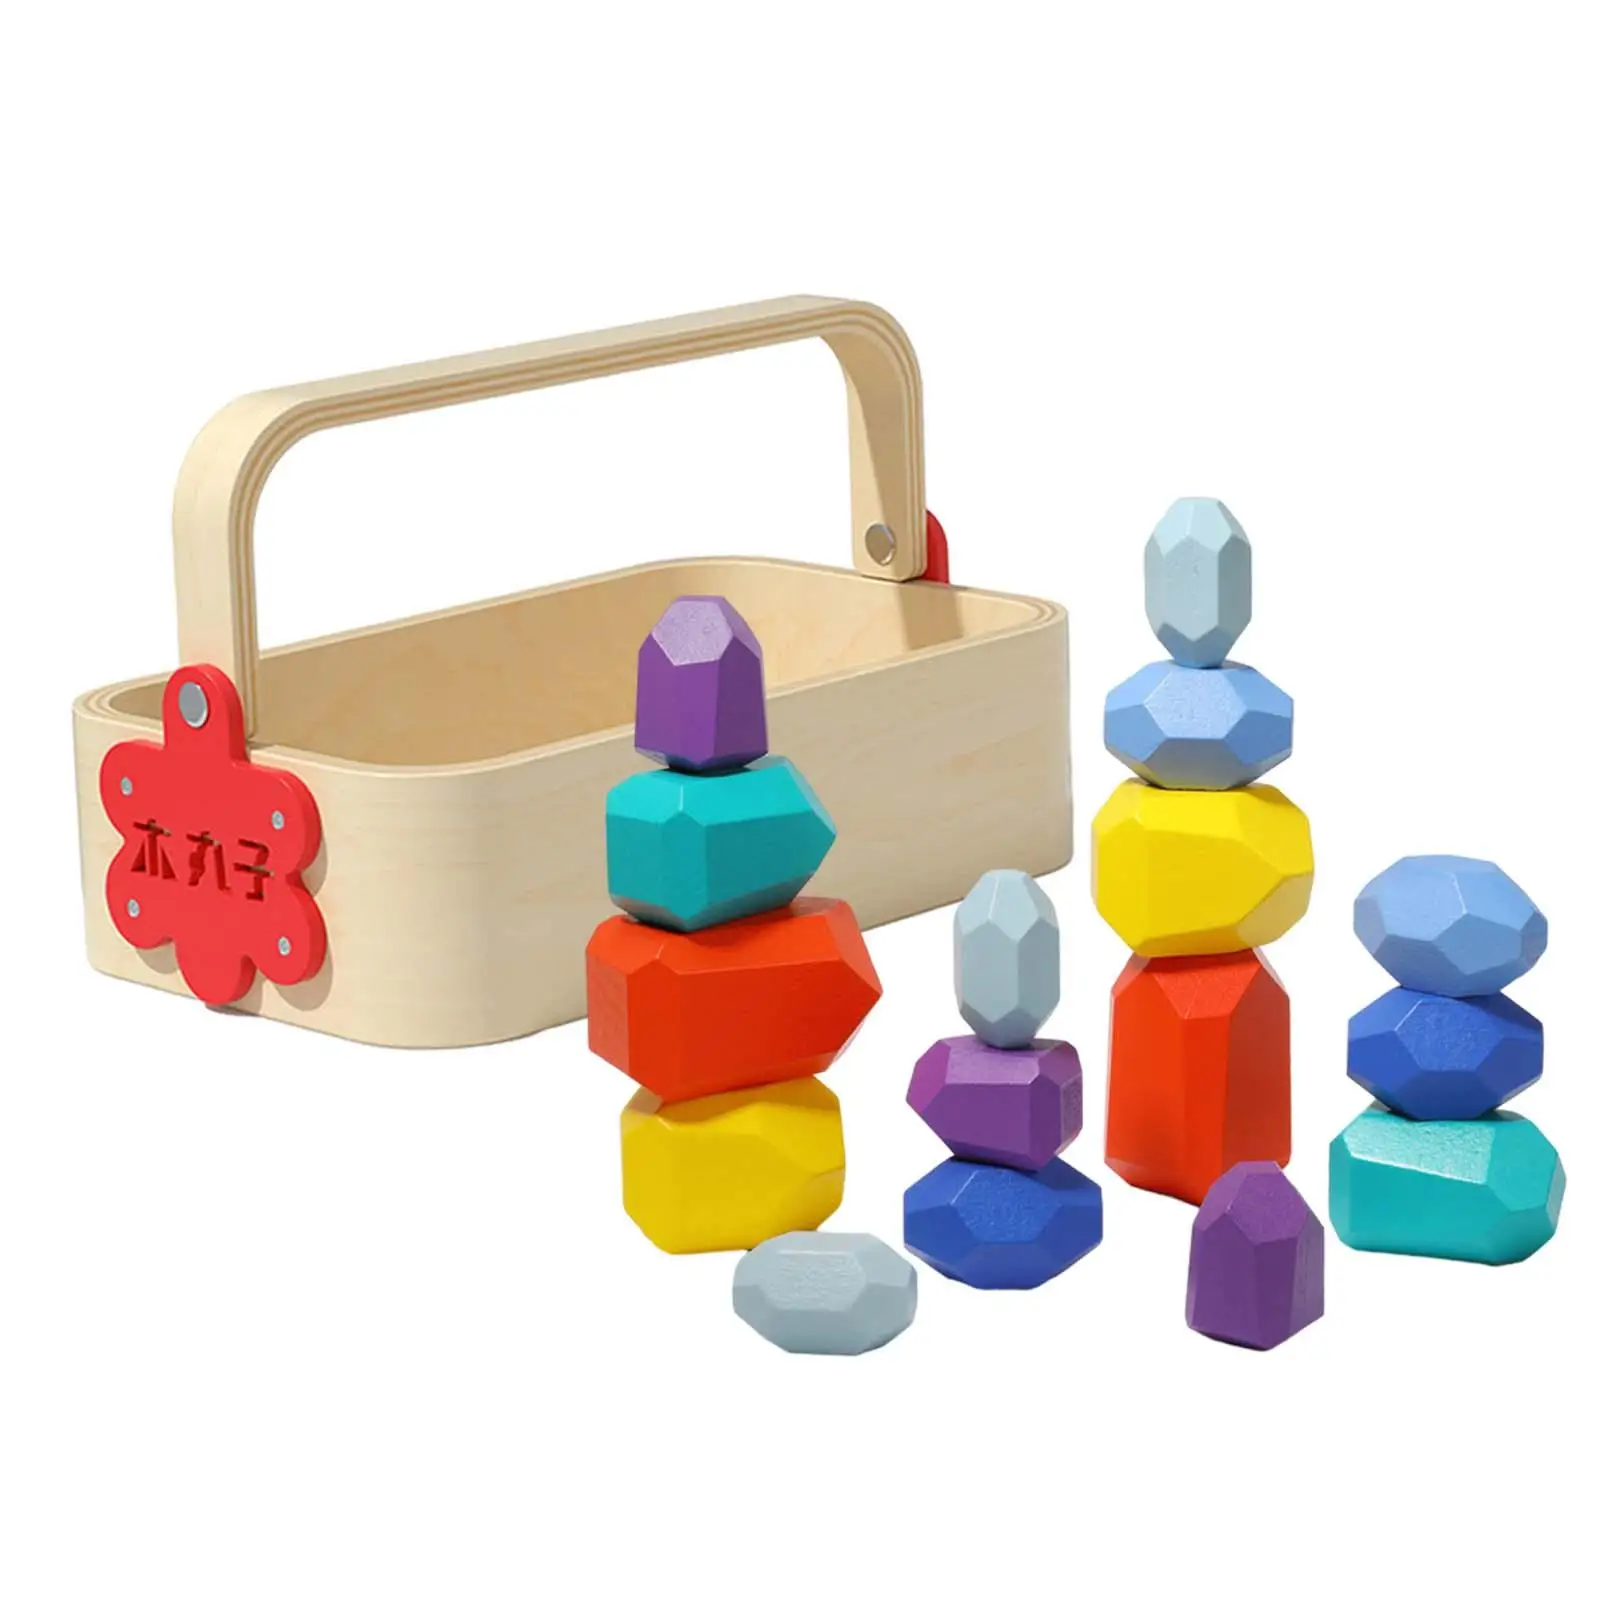 Stacking Blocks Rocks Hands on with Basket Educational Toy Colorful Building Blocks for Kid 3 Years up Children Boys Girls Gifts